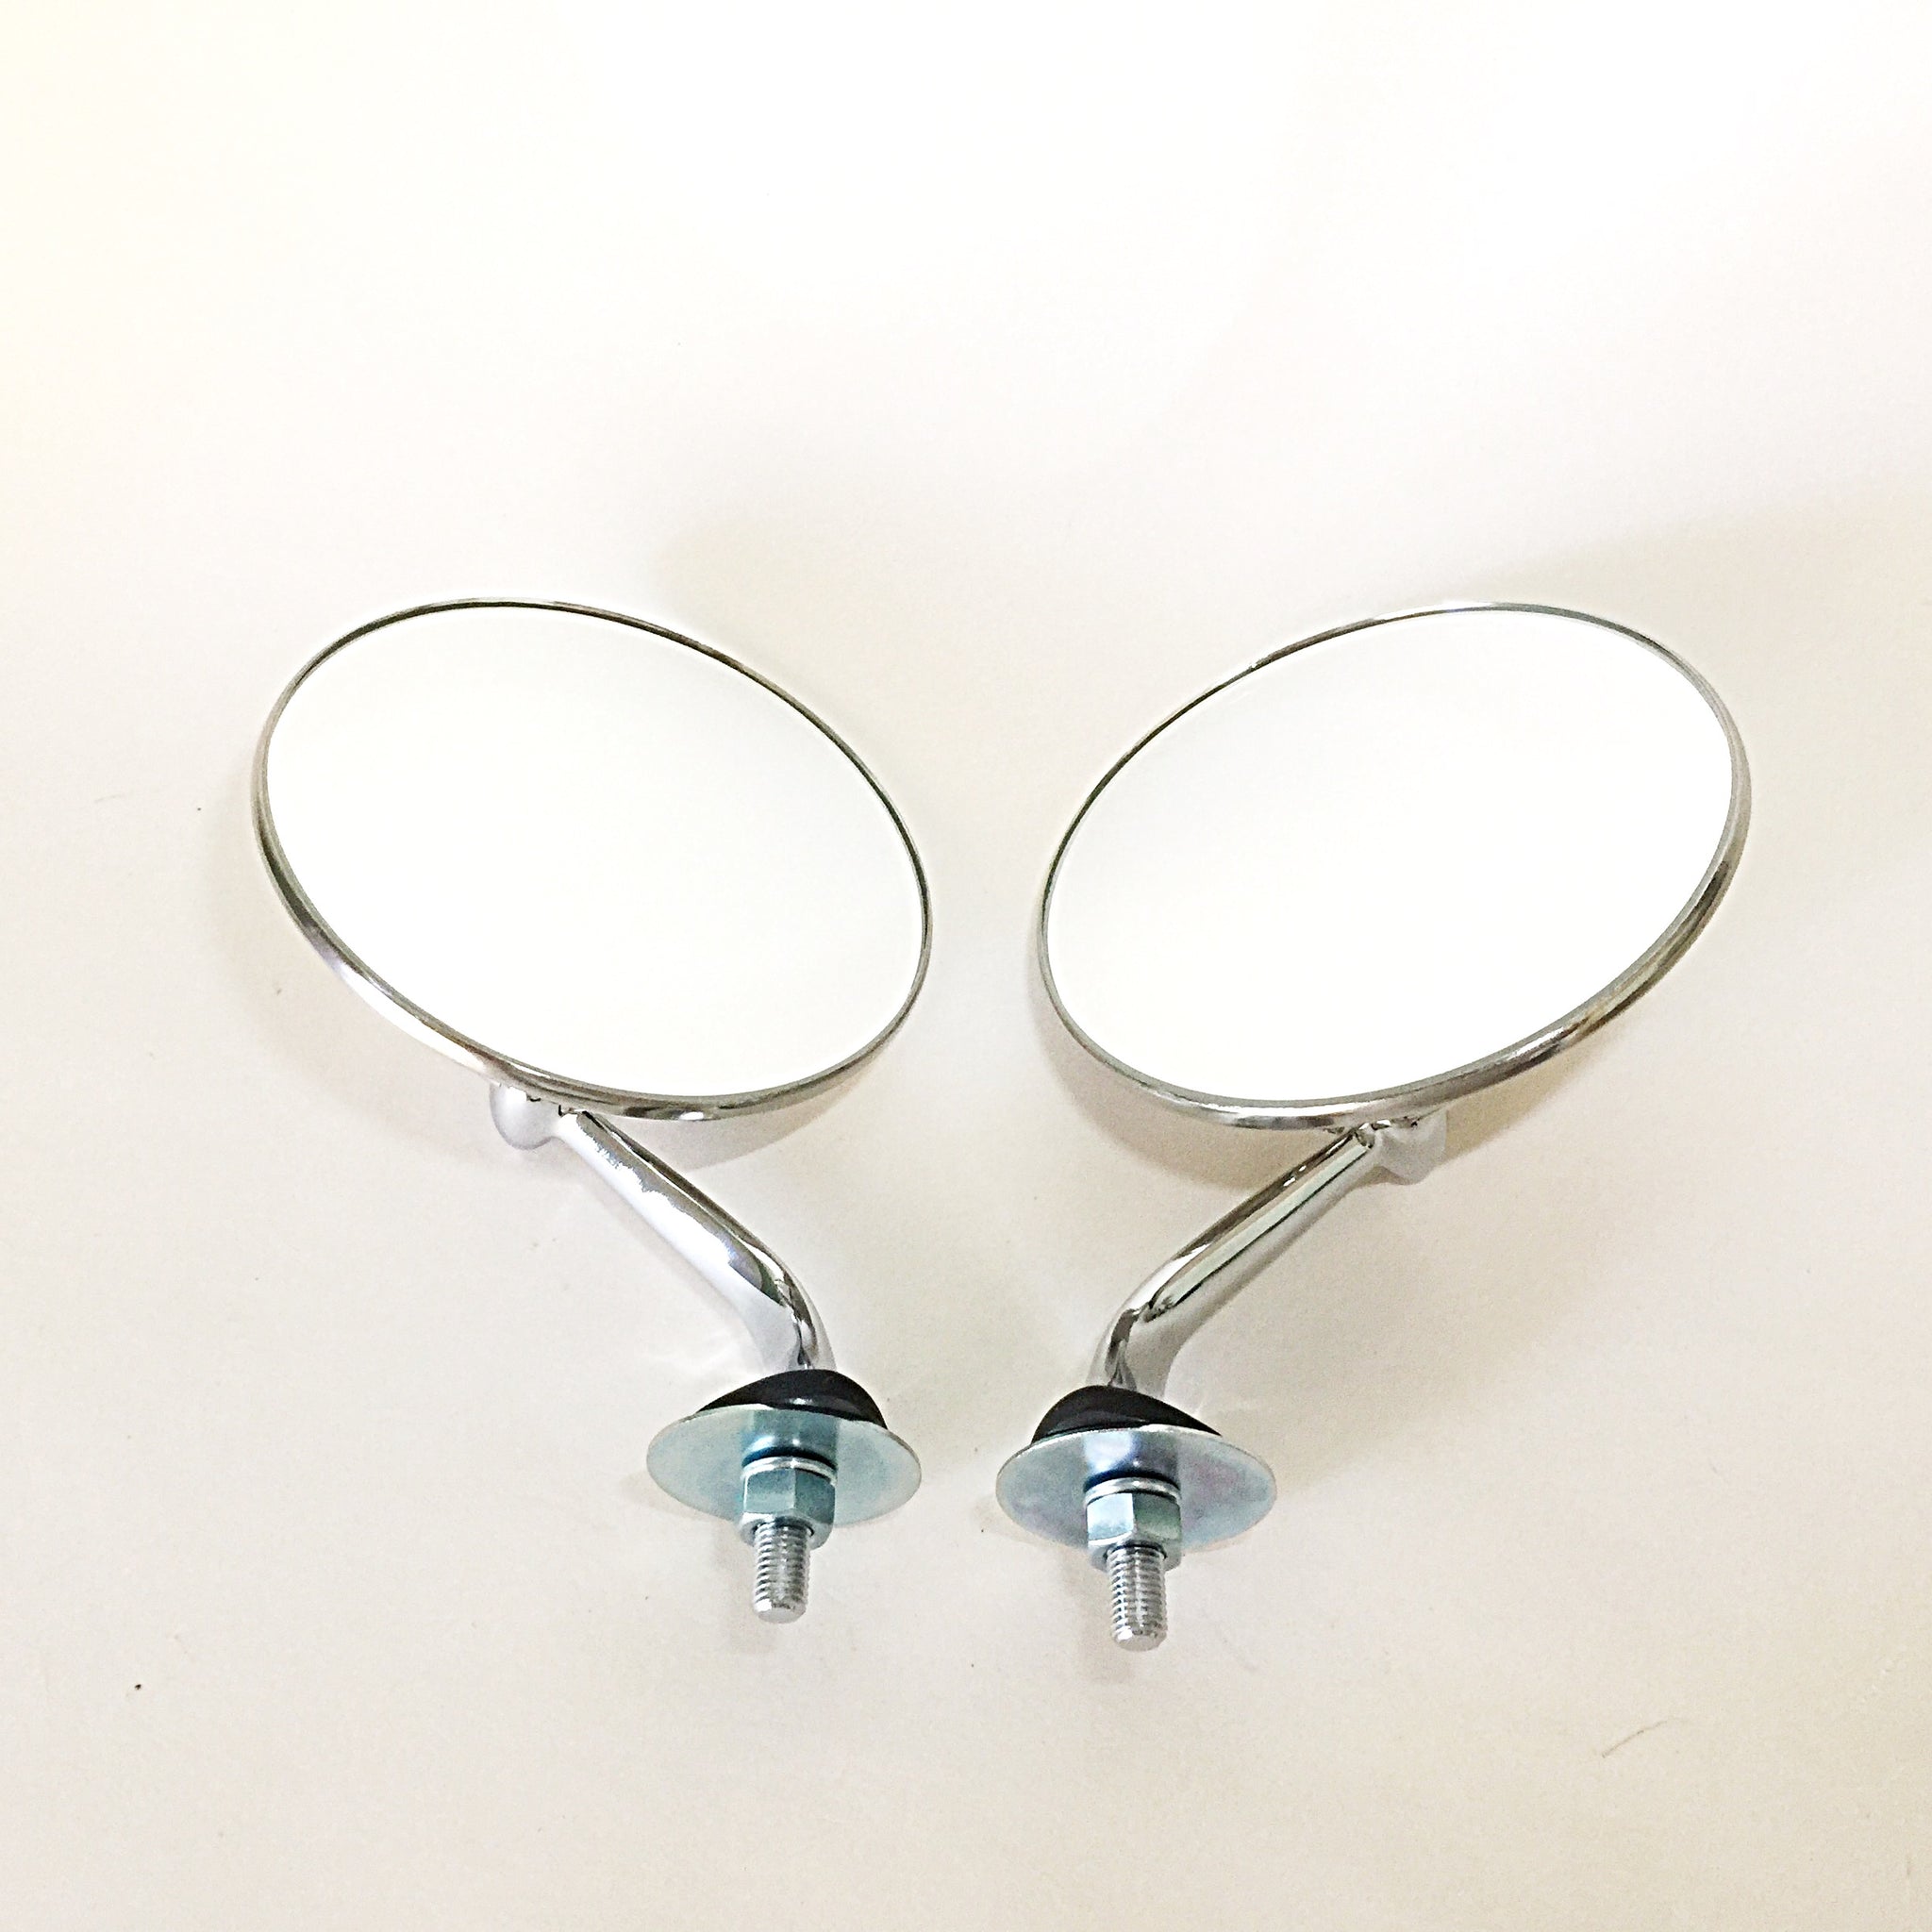 MG Style Rear View Mirrors - 1pr